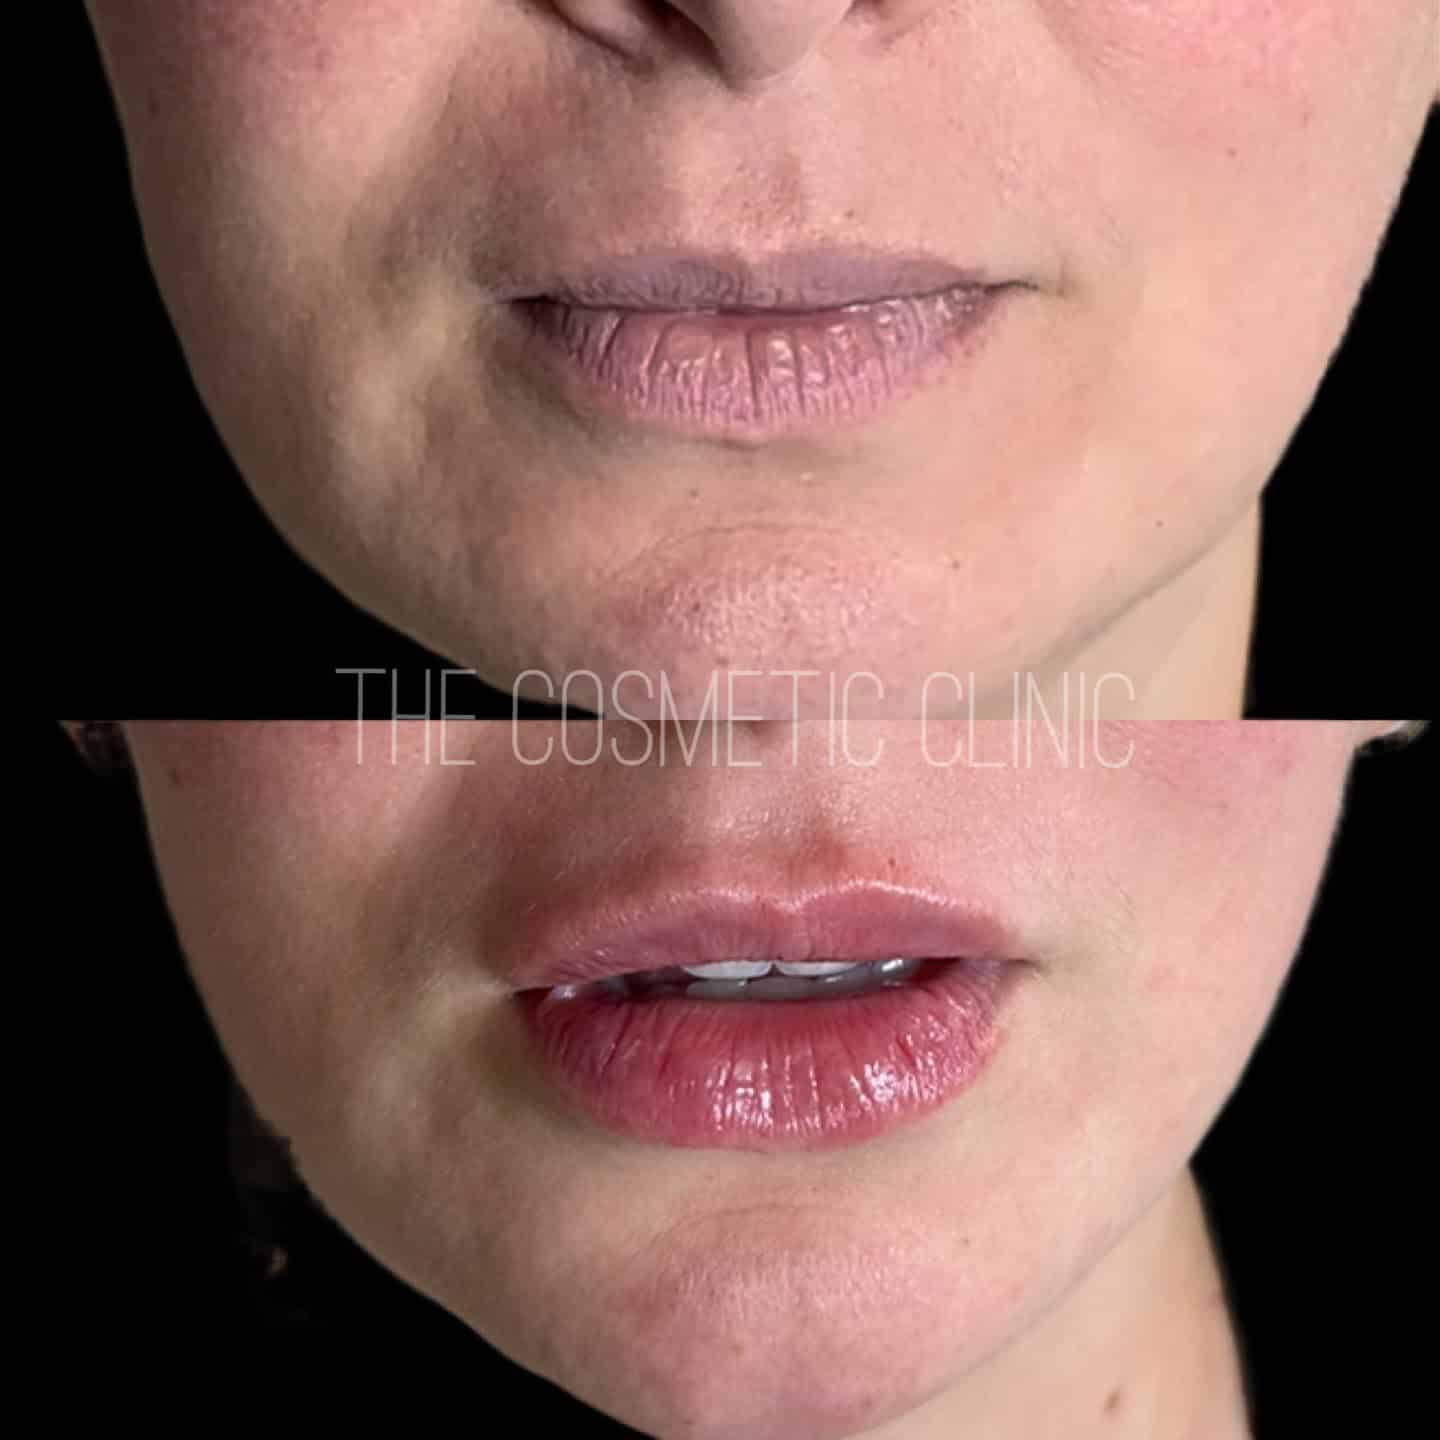 Female Dermal Filler Before and After Photos with The Cosmetic Clinic | The Cosmetic Clinic in Greenwich, CT